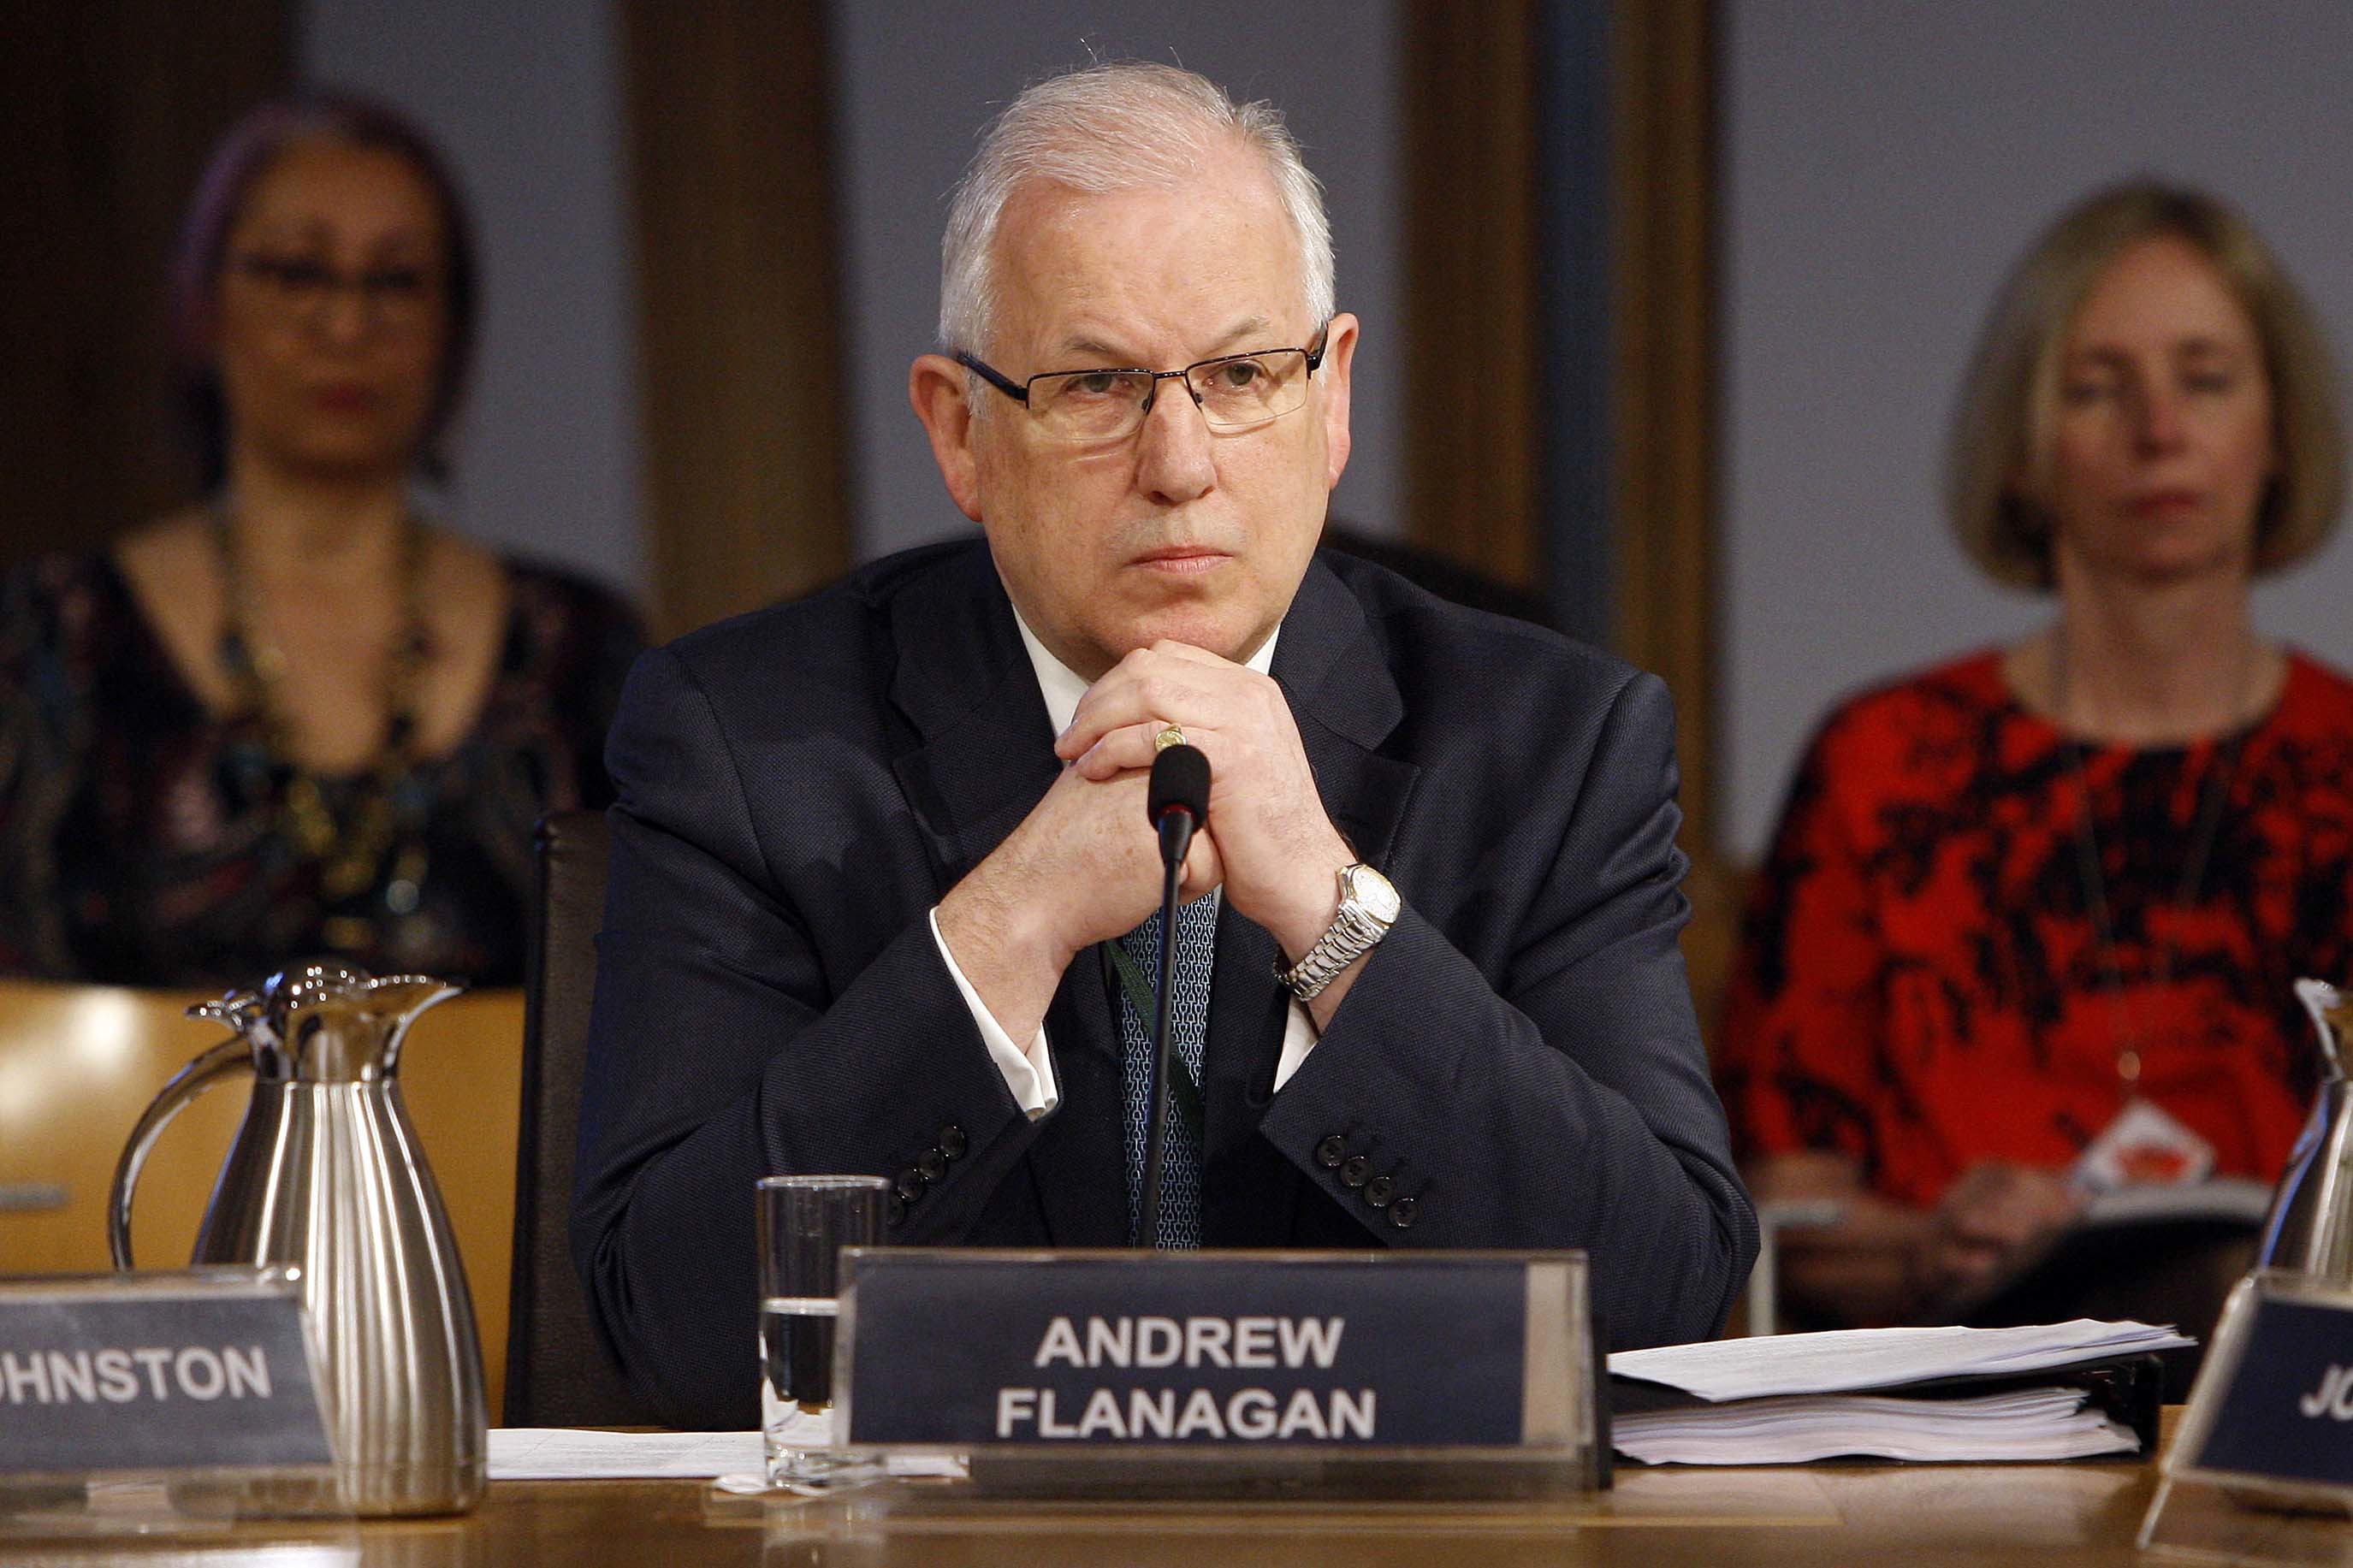 Andrew Flanagan, Chair of the Board, Scottish Police Authority appears before the Public Audit and Post-legislative Scrutiny Committee.